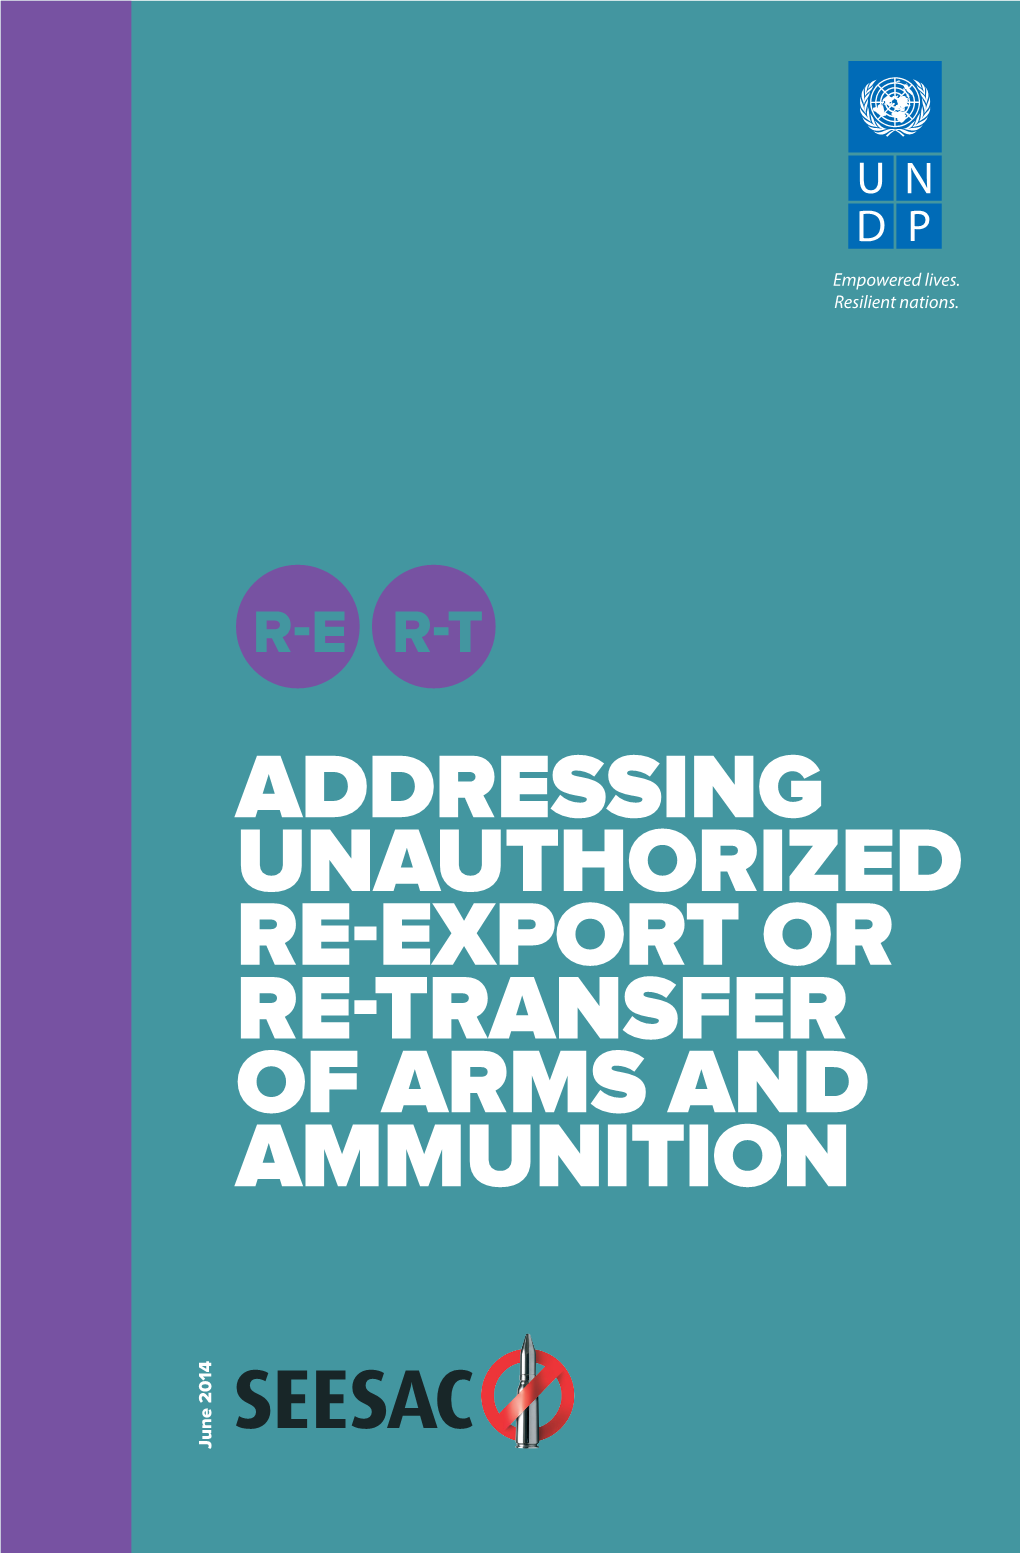 Addressing Unauthorized Re-Export Or Re-Transfer of Arms and Ammunition